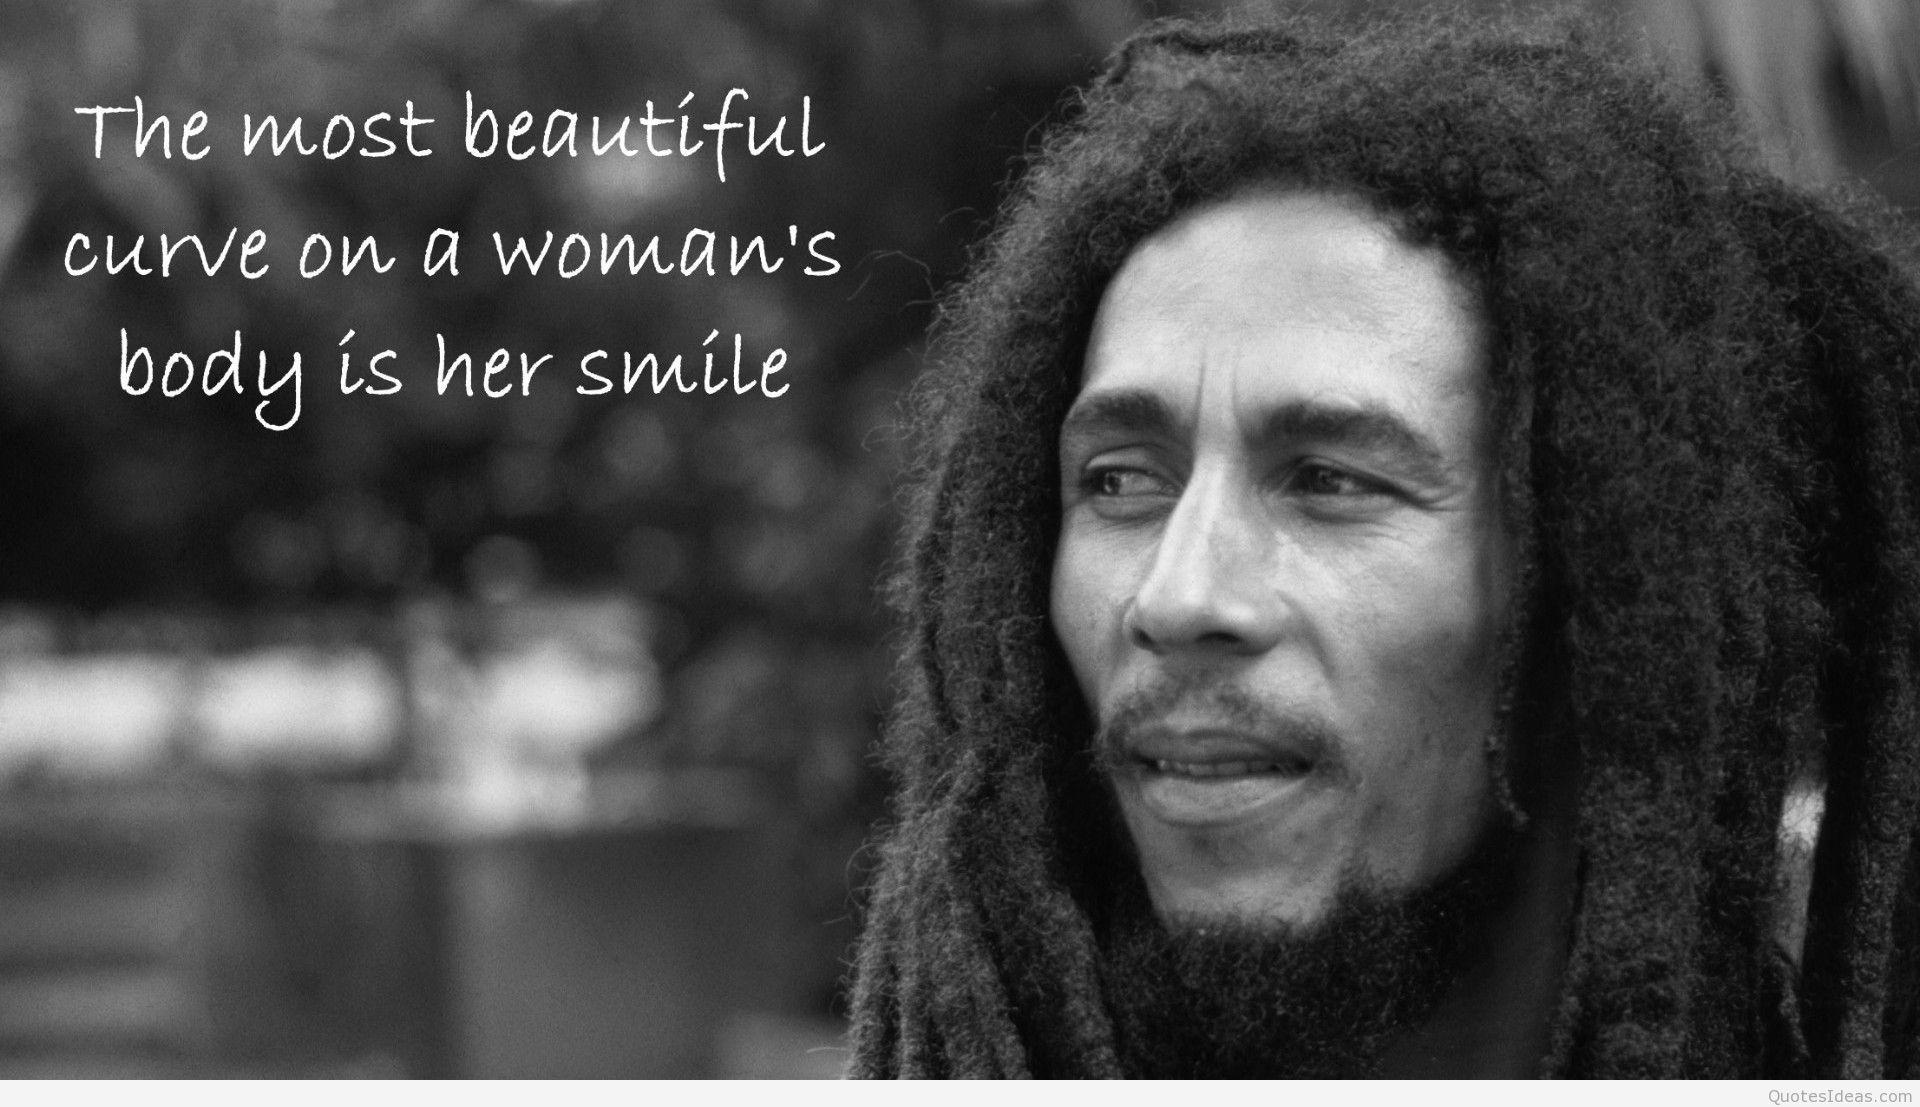 Awesome Bob Marley quotes photo